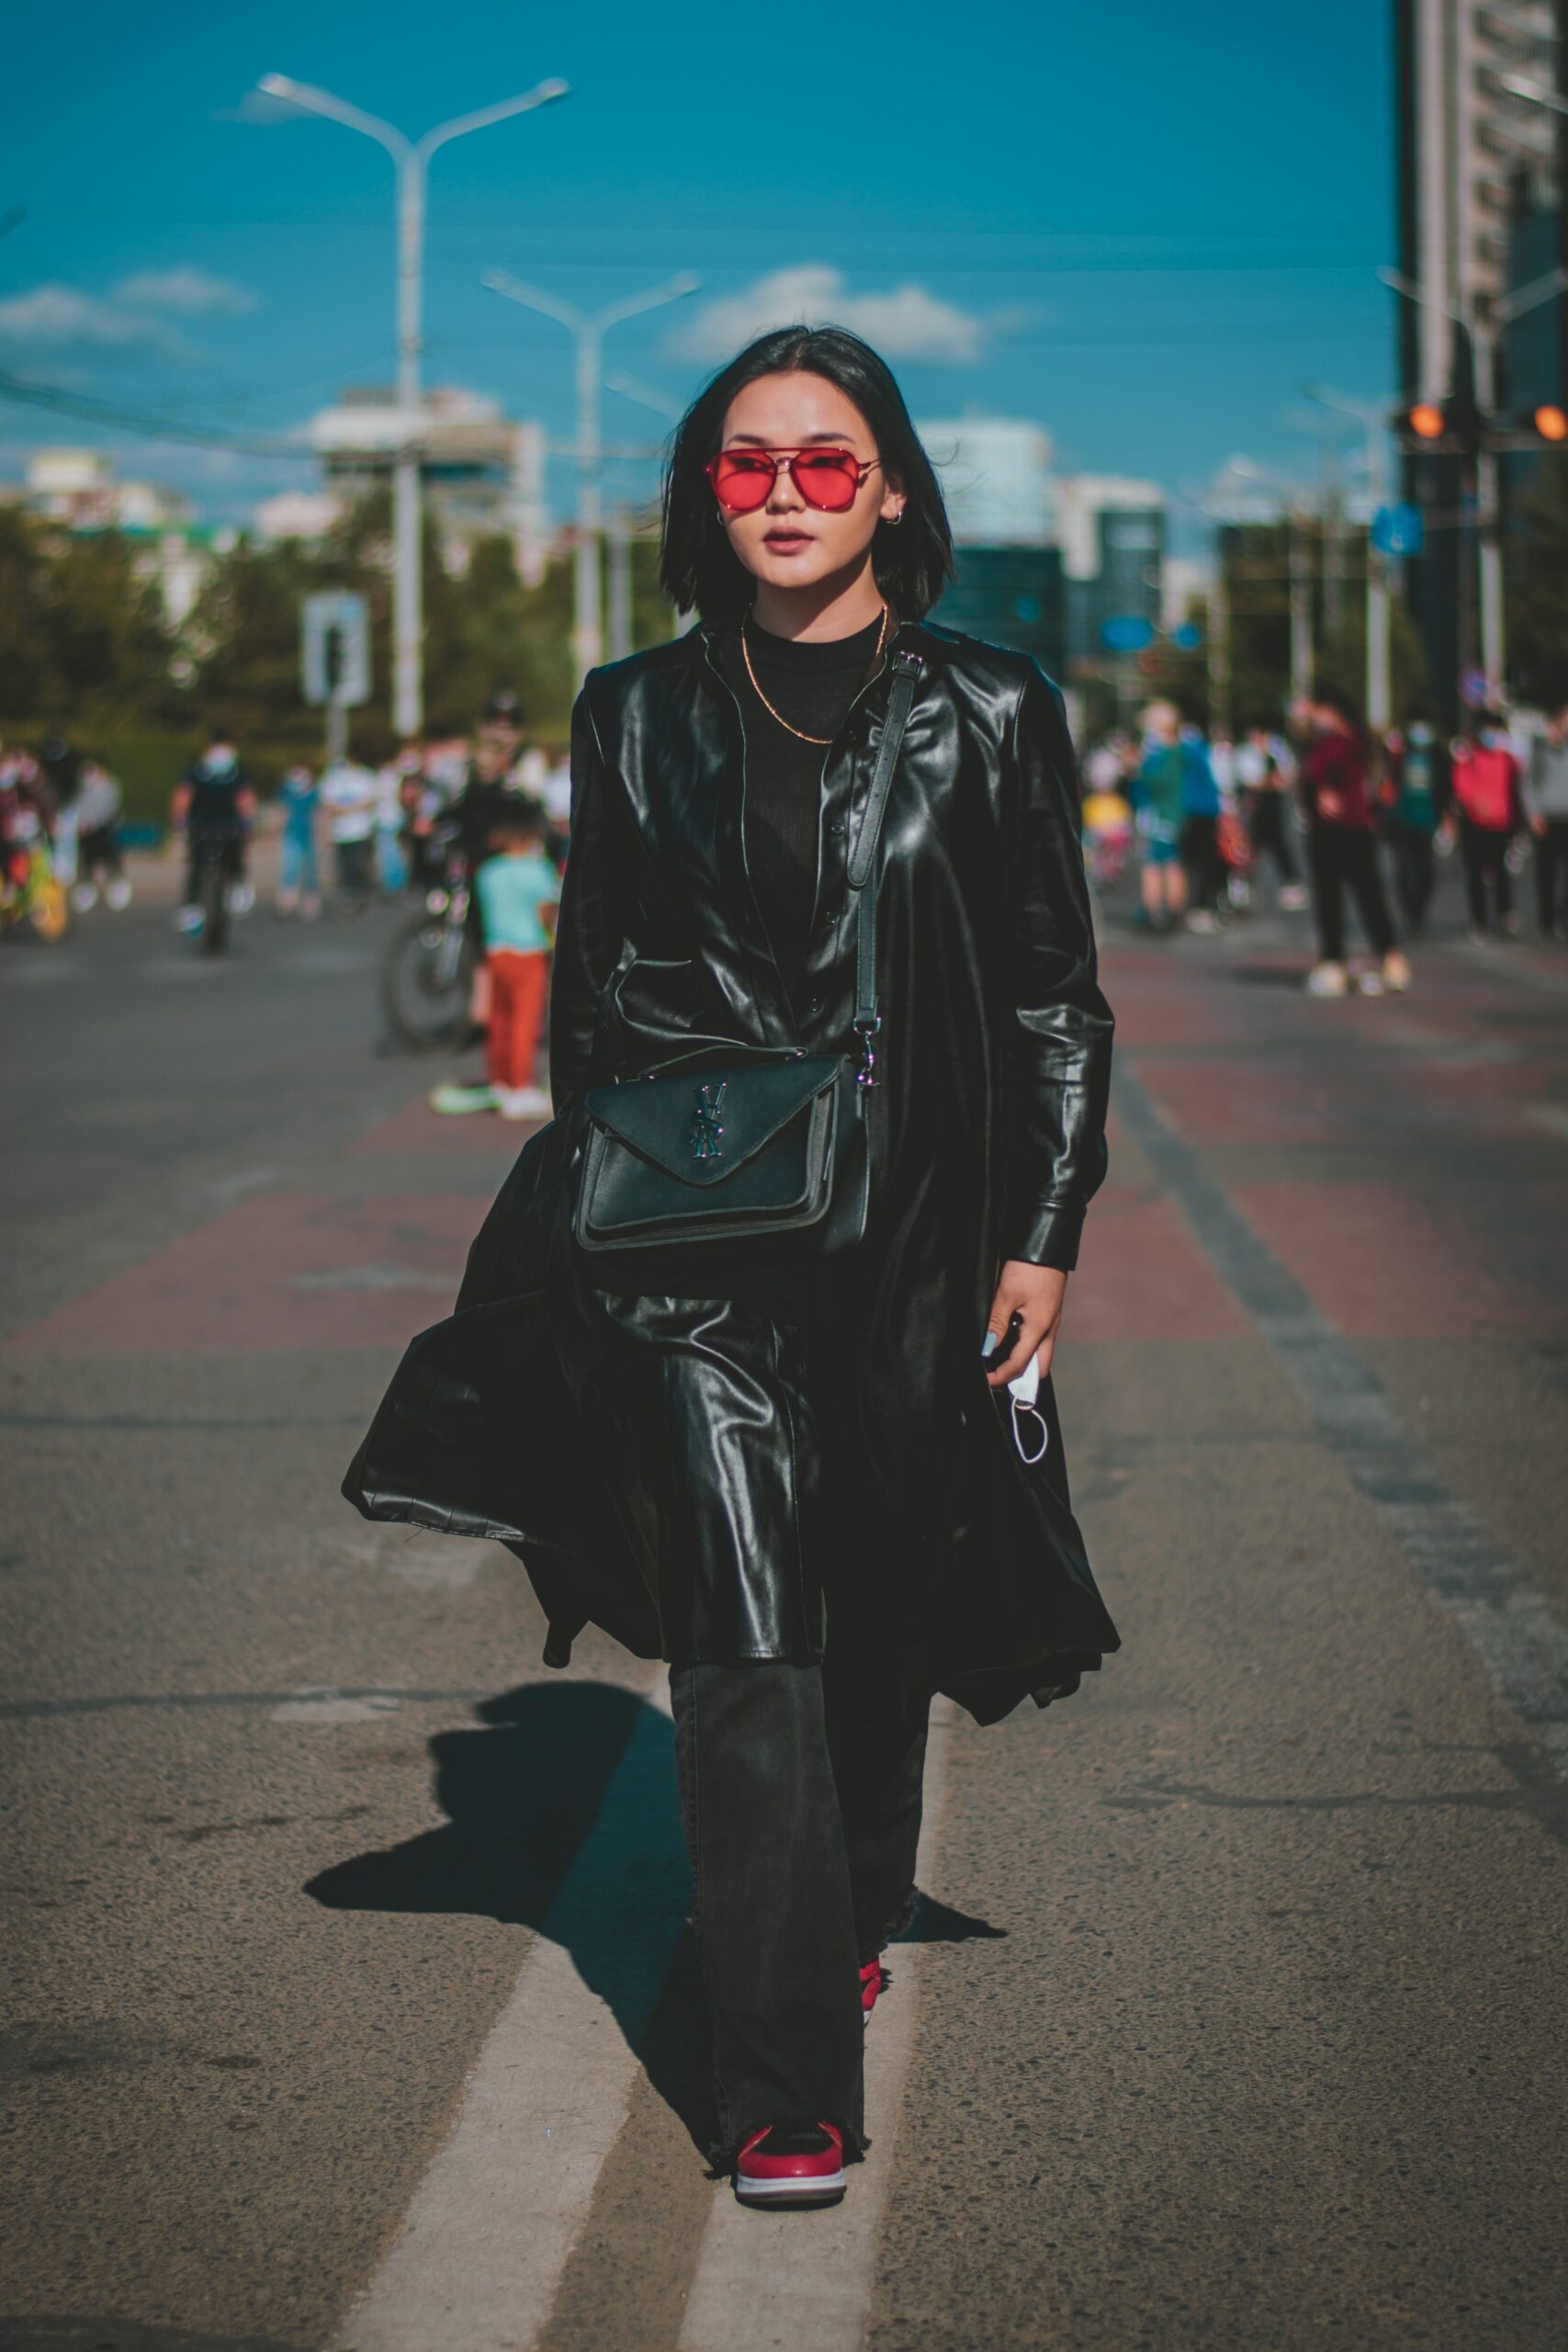 East Asian woman wearing luxury clothes